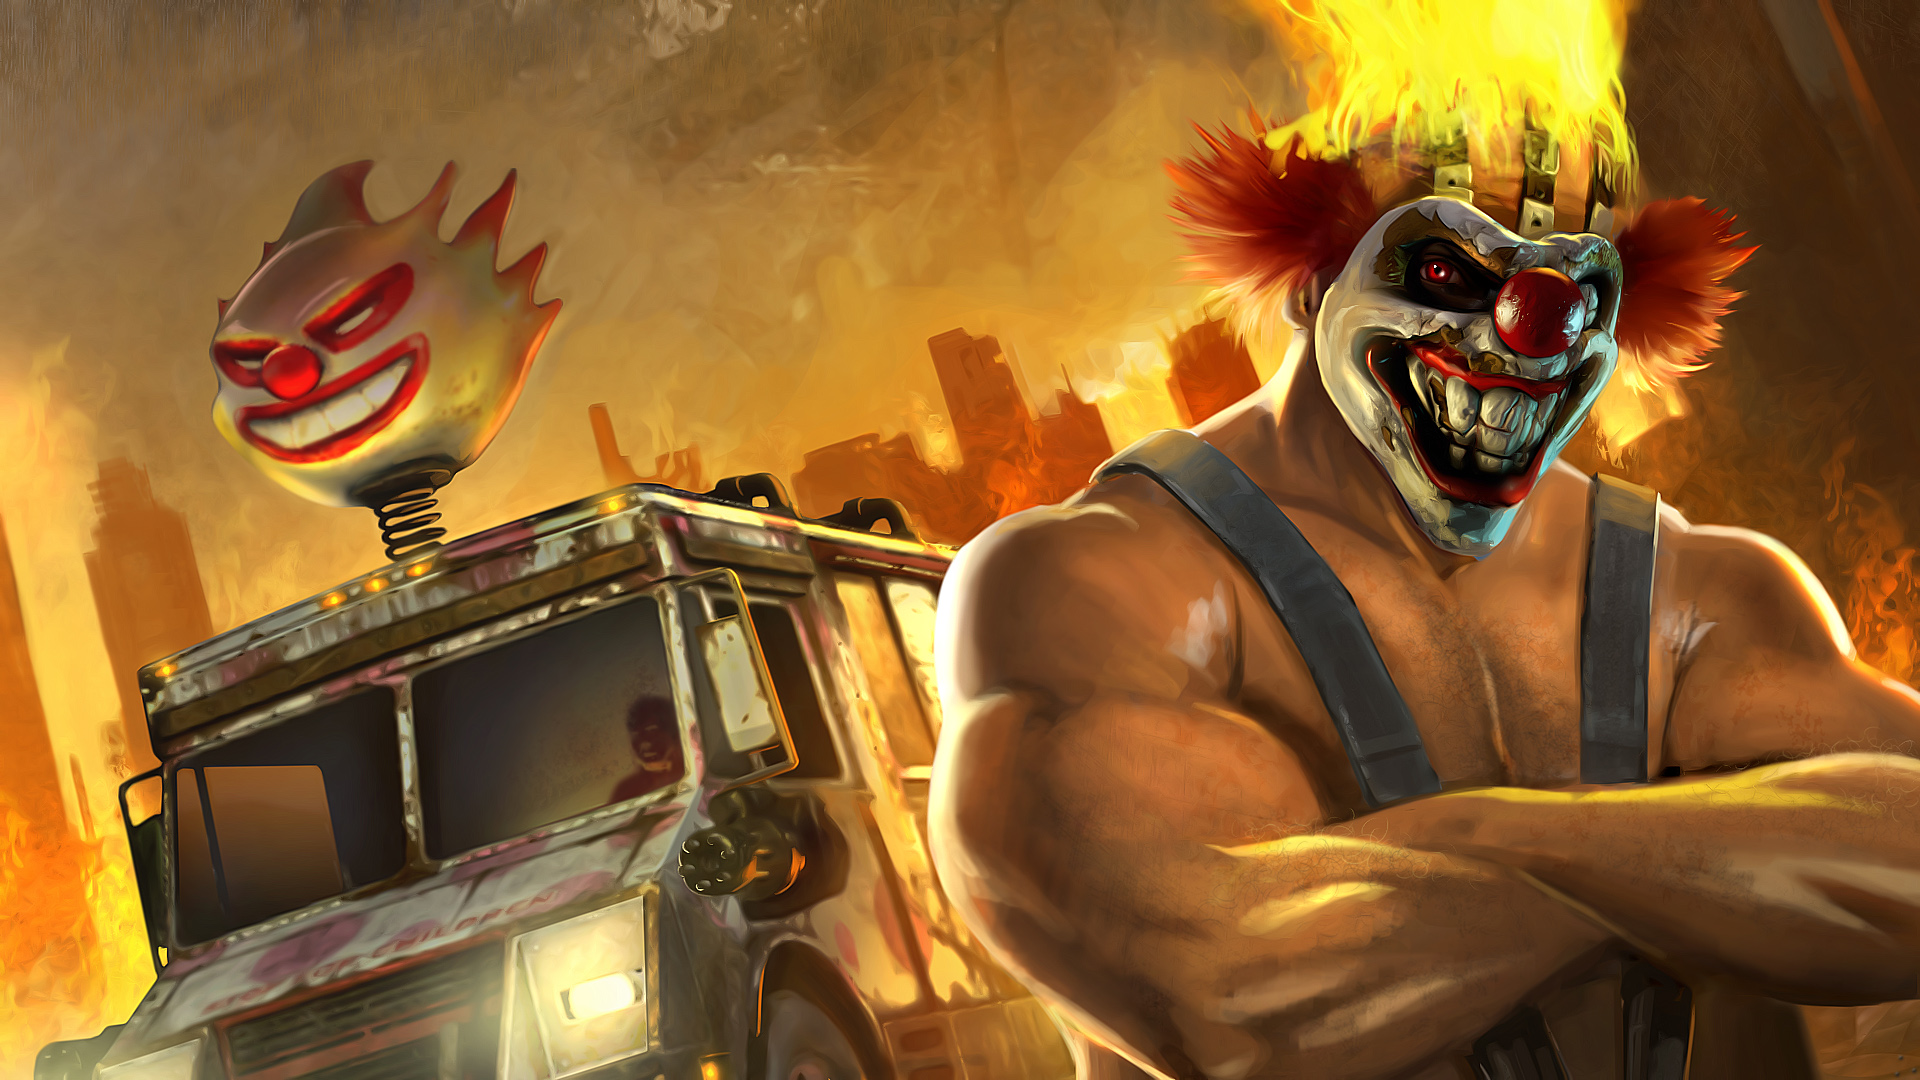 Twisted Metal 2011 Wallpapers in HD Page 2